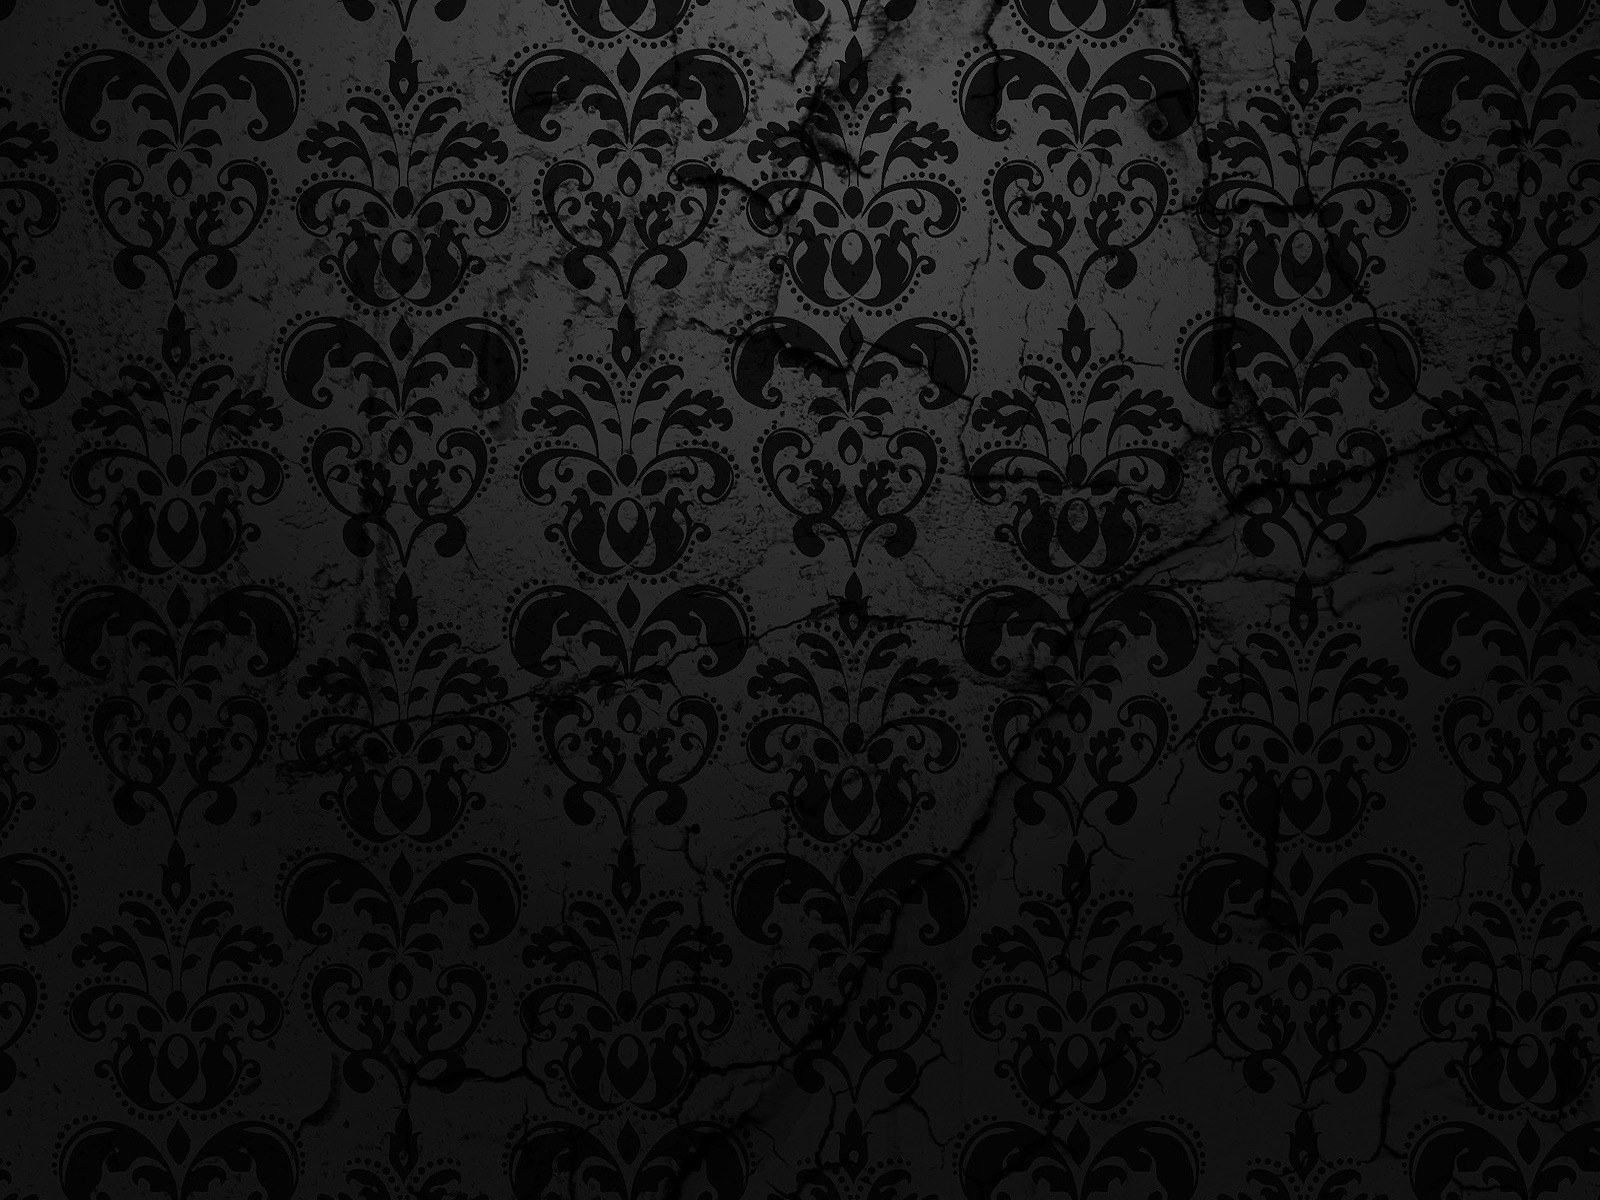 Damask for 1600 x 1200 resolution